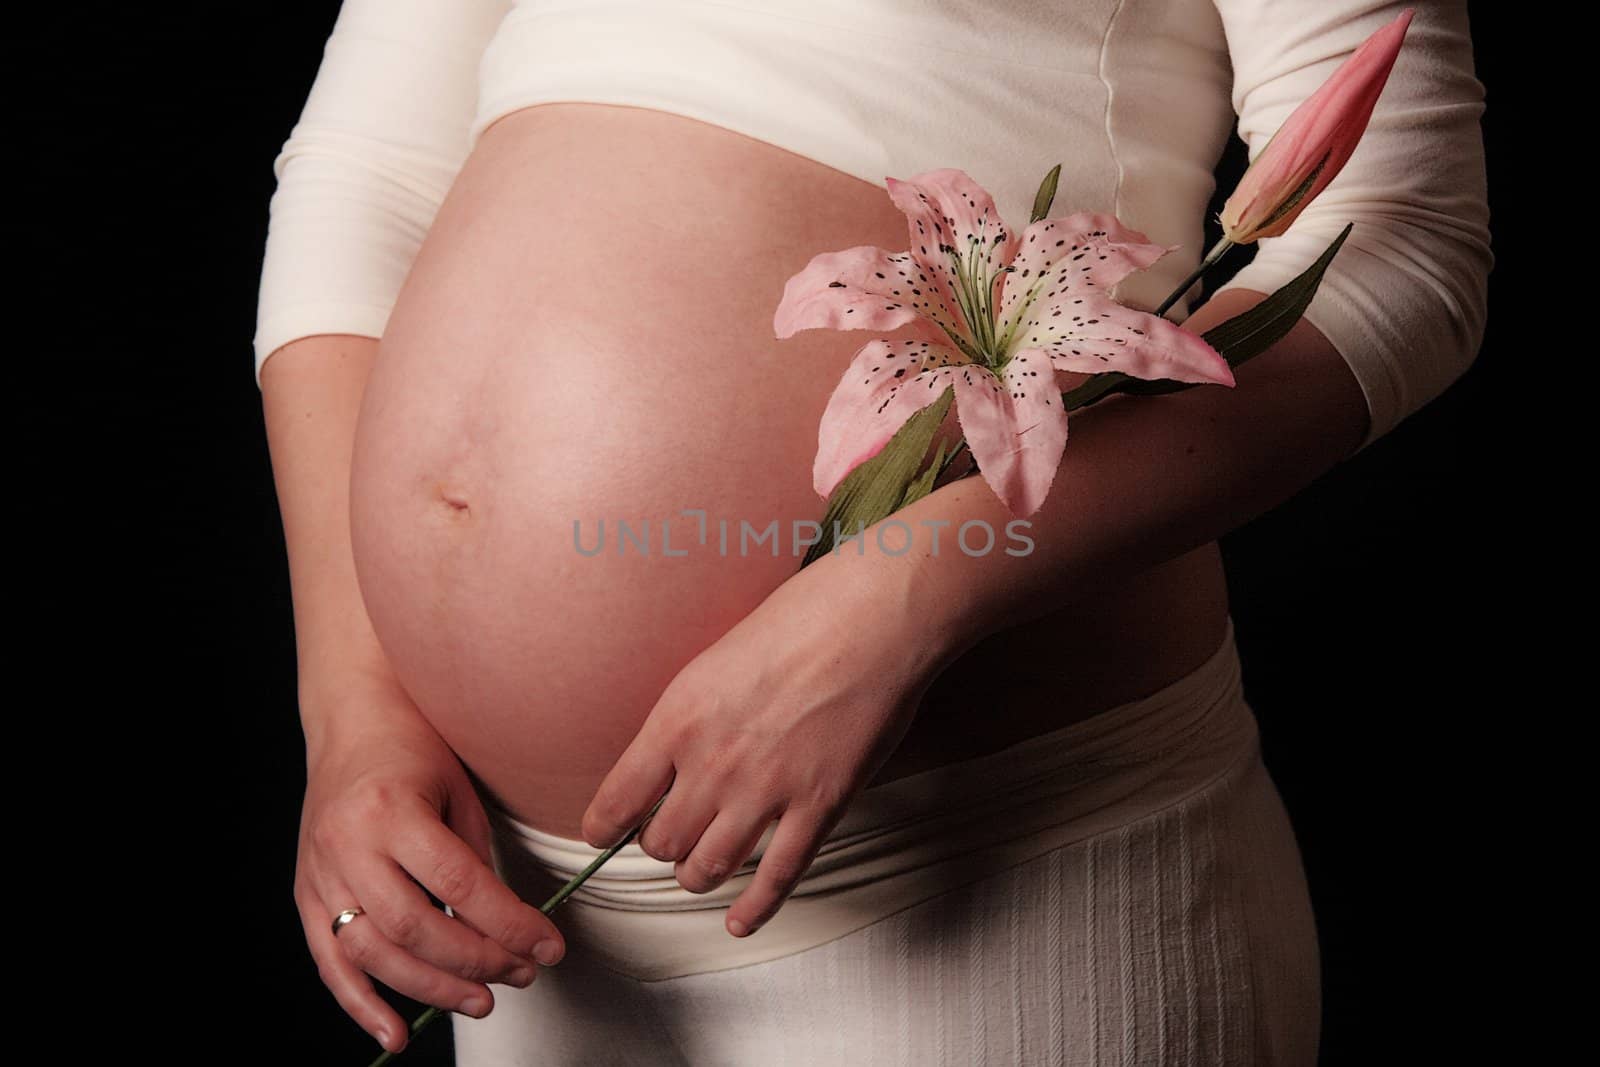 Pregnant mother holding belly exposing the bump